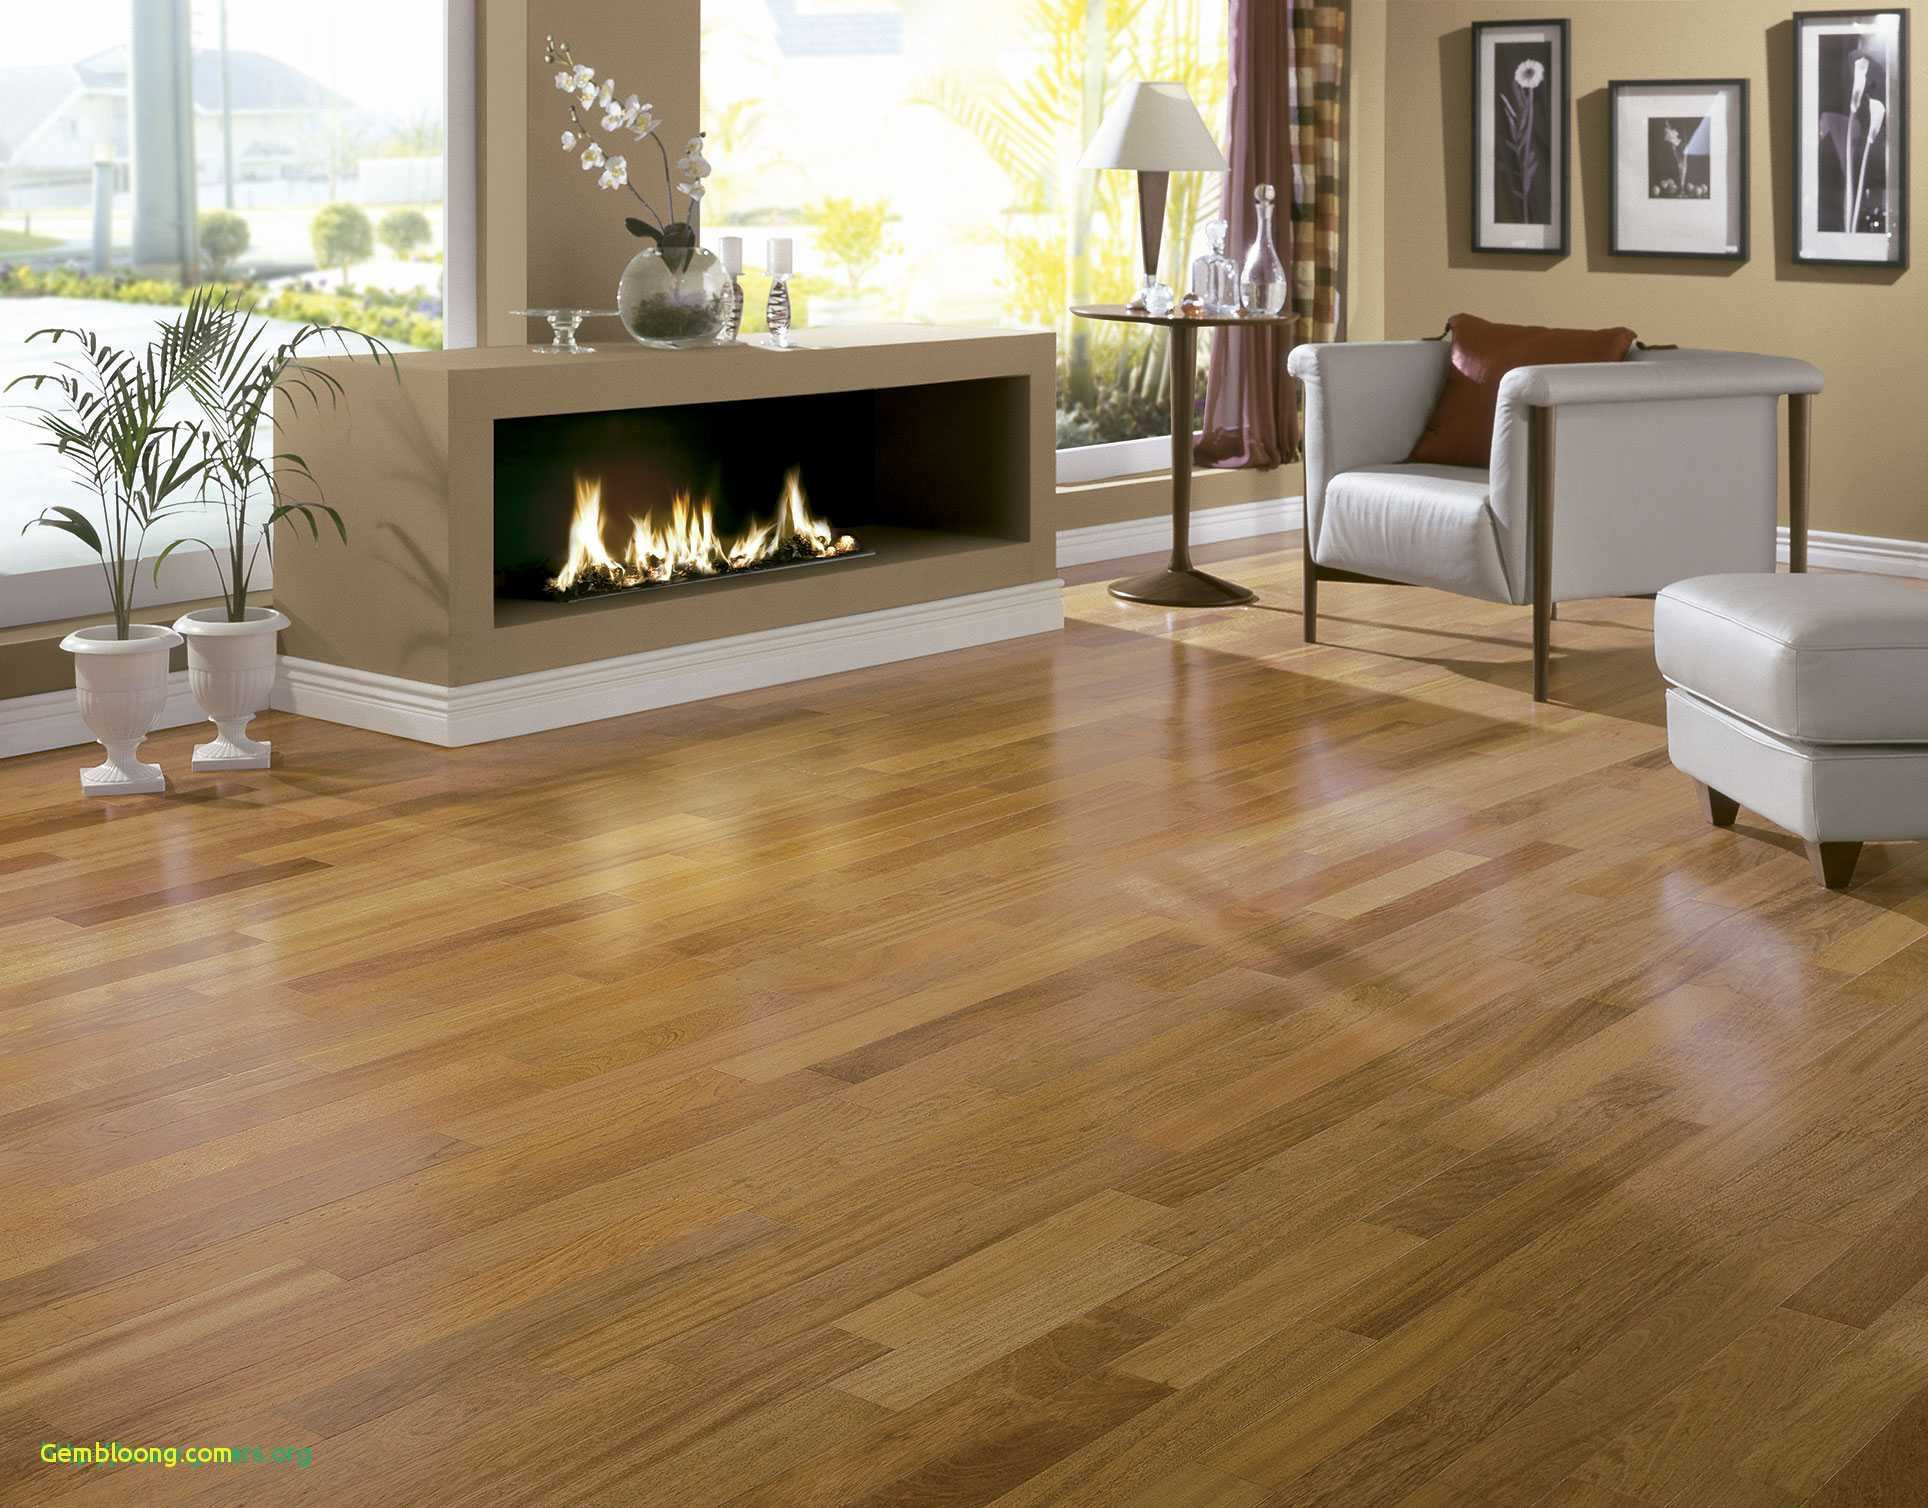 14 Awesome Porcelain Tile Vs Hardwood Flooring Cost 2024 free download porcelain tile vs hardwood flooring cost of wood for floors facesinnature in solid wood floor polish inspirant engaging discount hardwood flooring 5 where to buy inspirational 0d